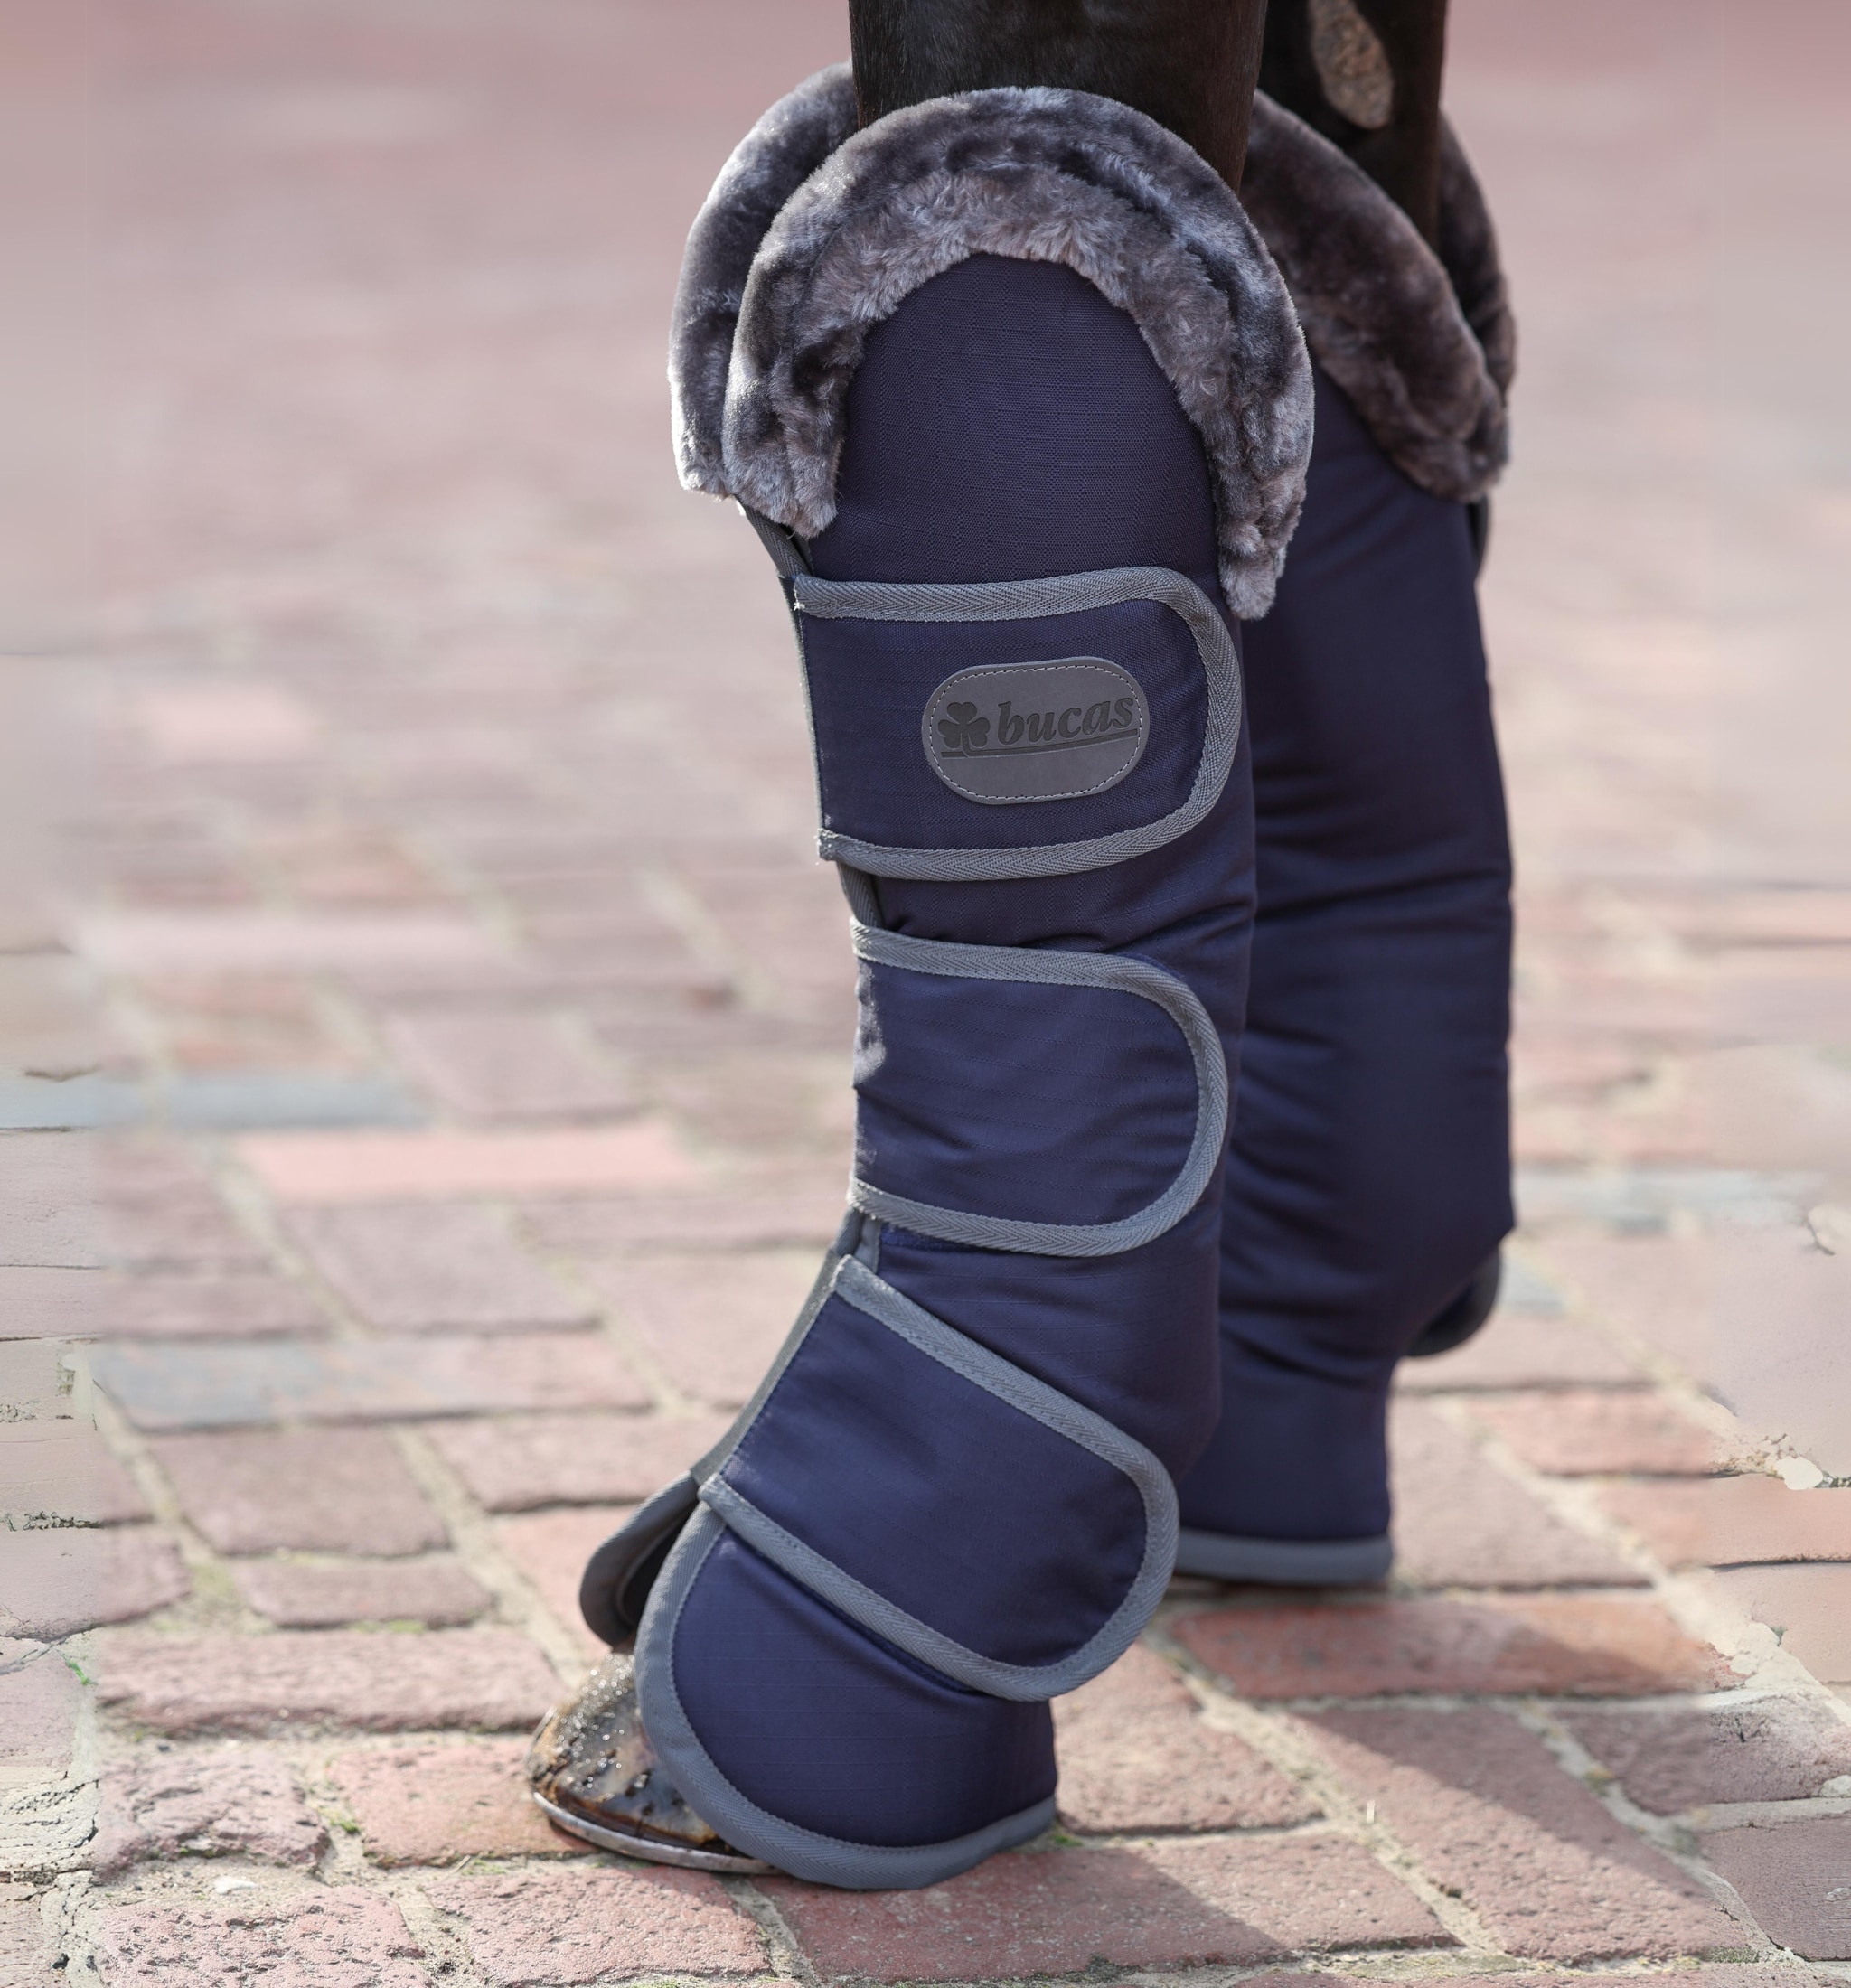 Show-Line Travel Boots - Navy